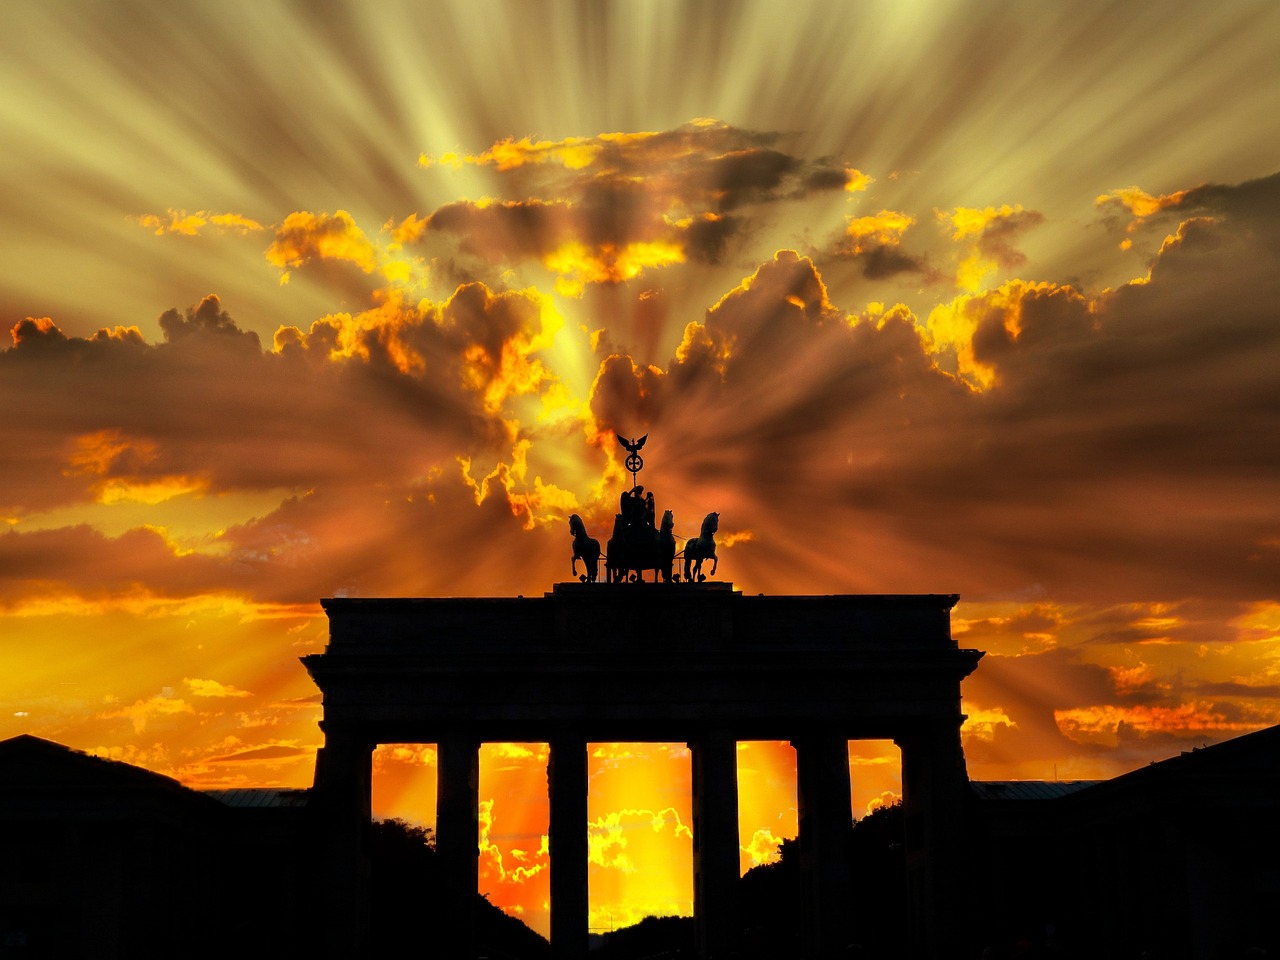 Historical Berlin: Landmarks, Museums & Significant Sites